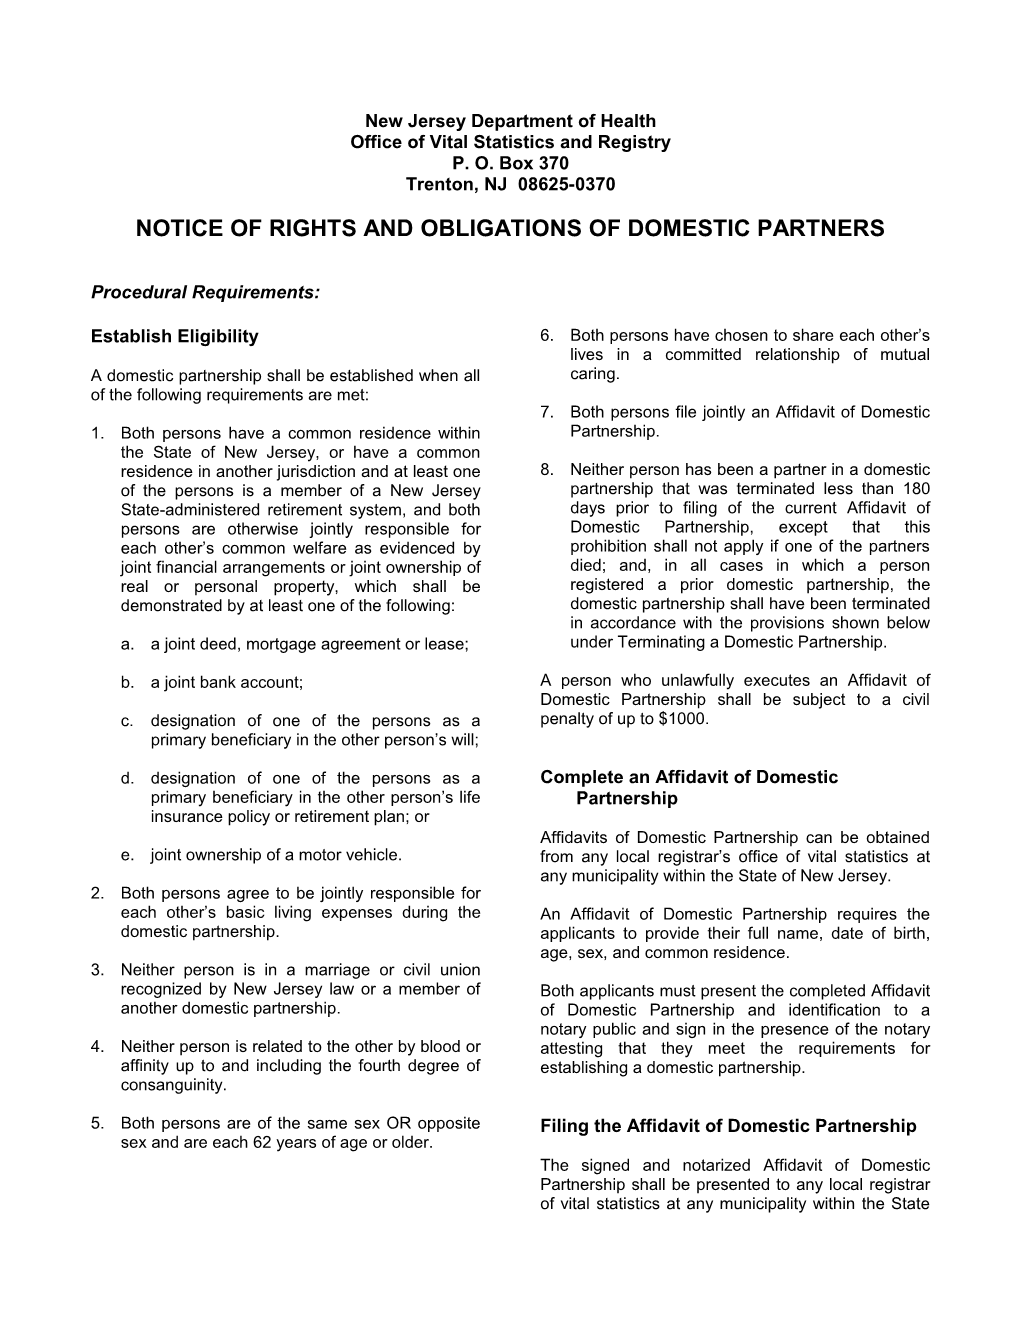 REG-D7, Notice of Rights and Obligations of Domestic Partners